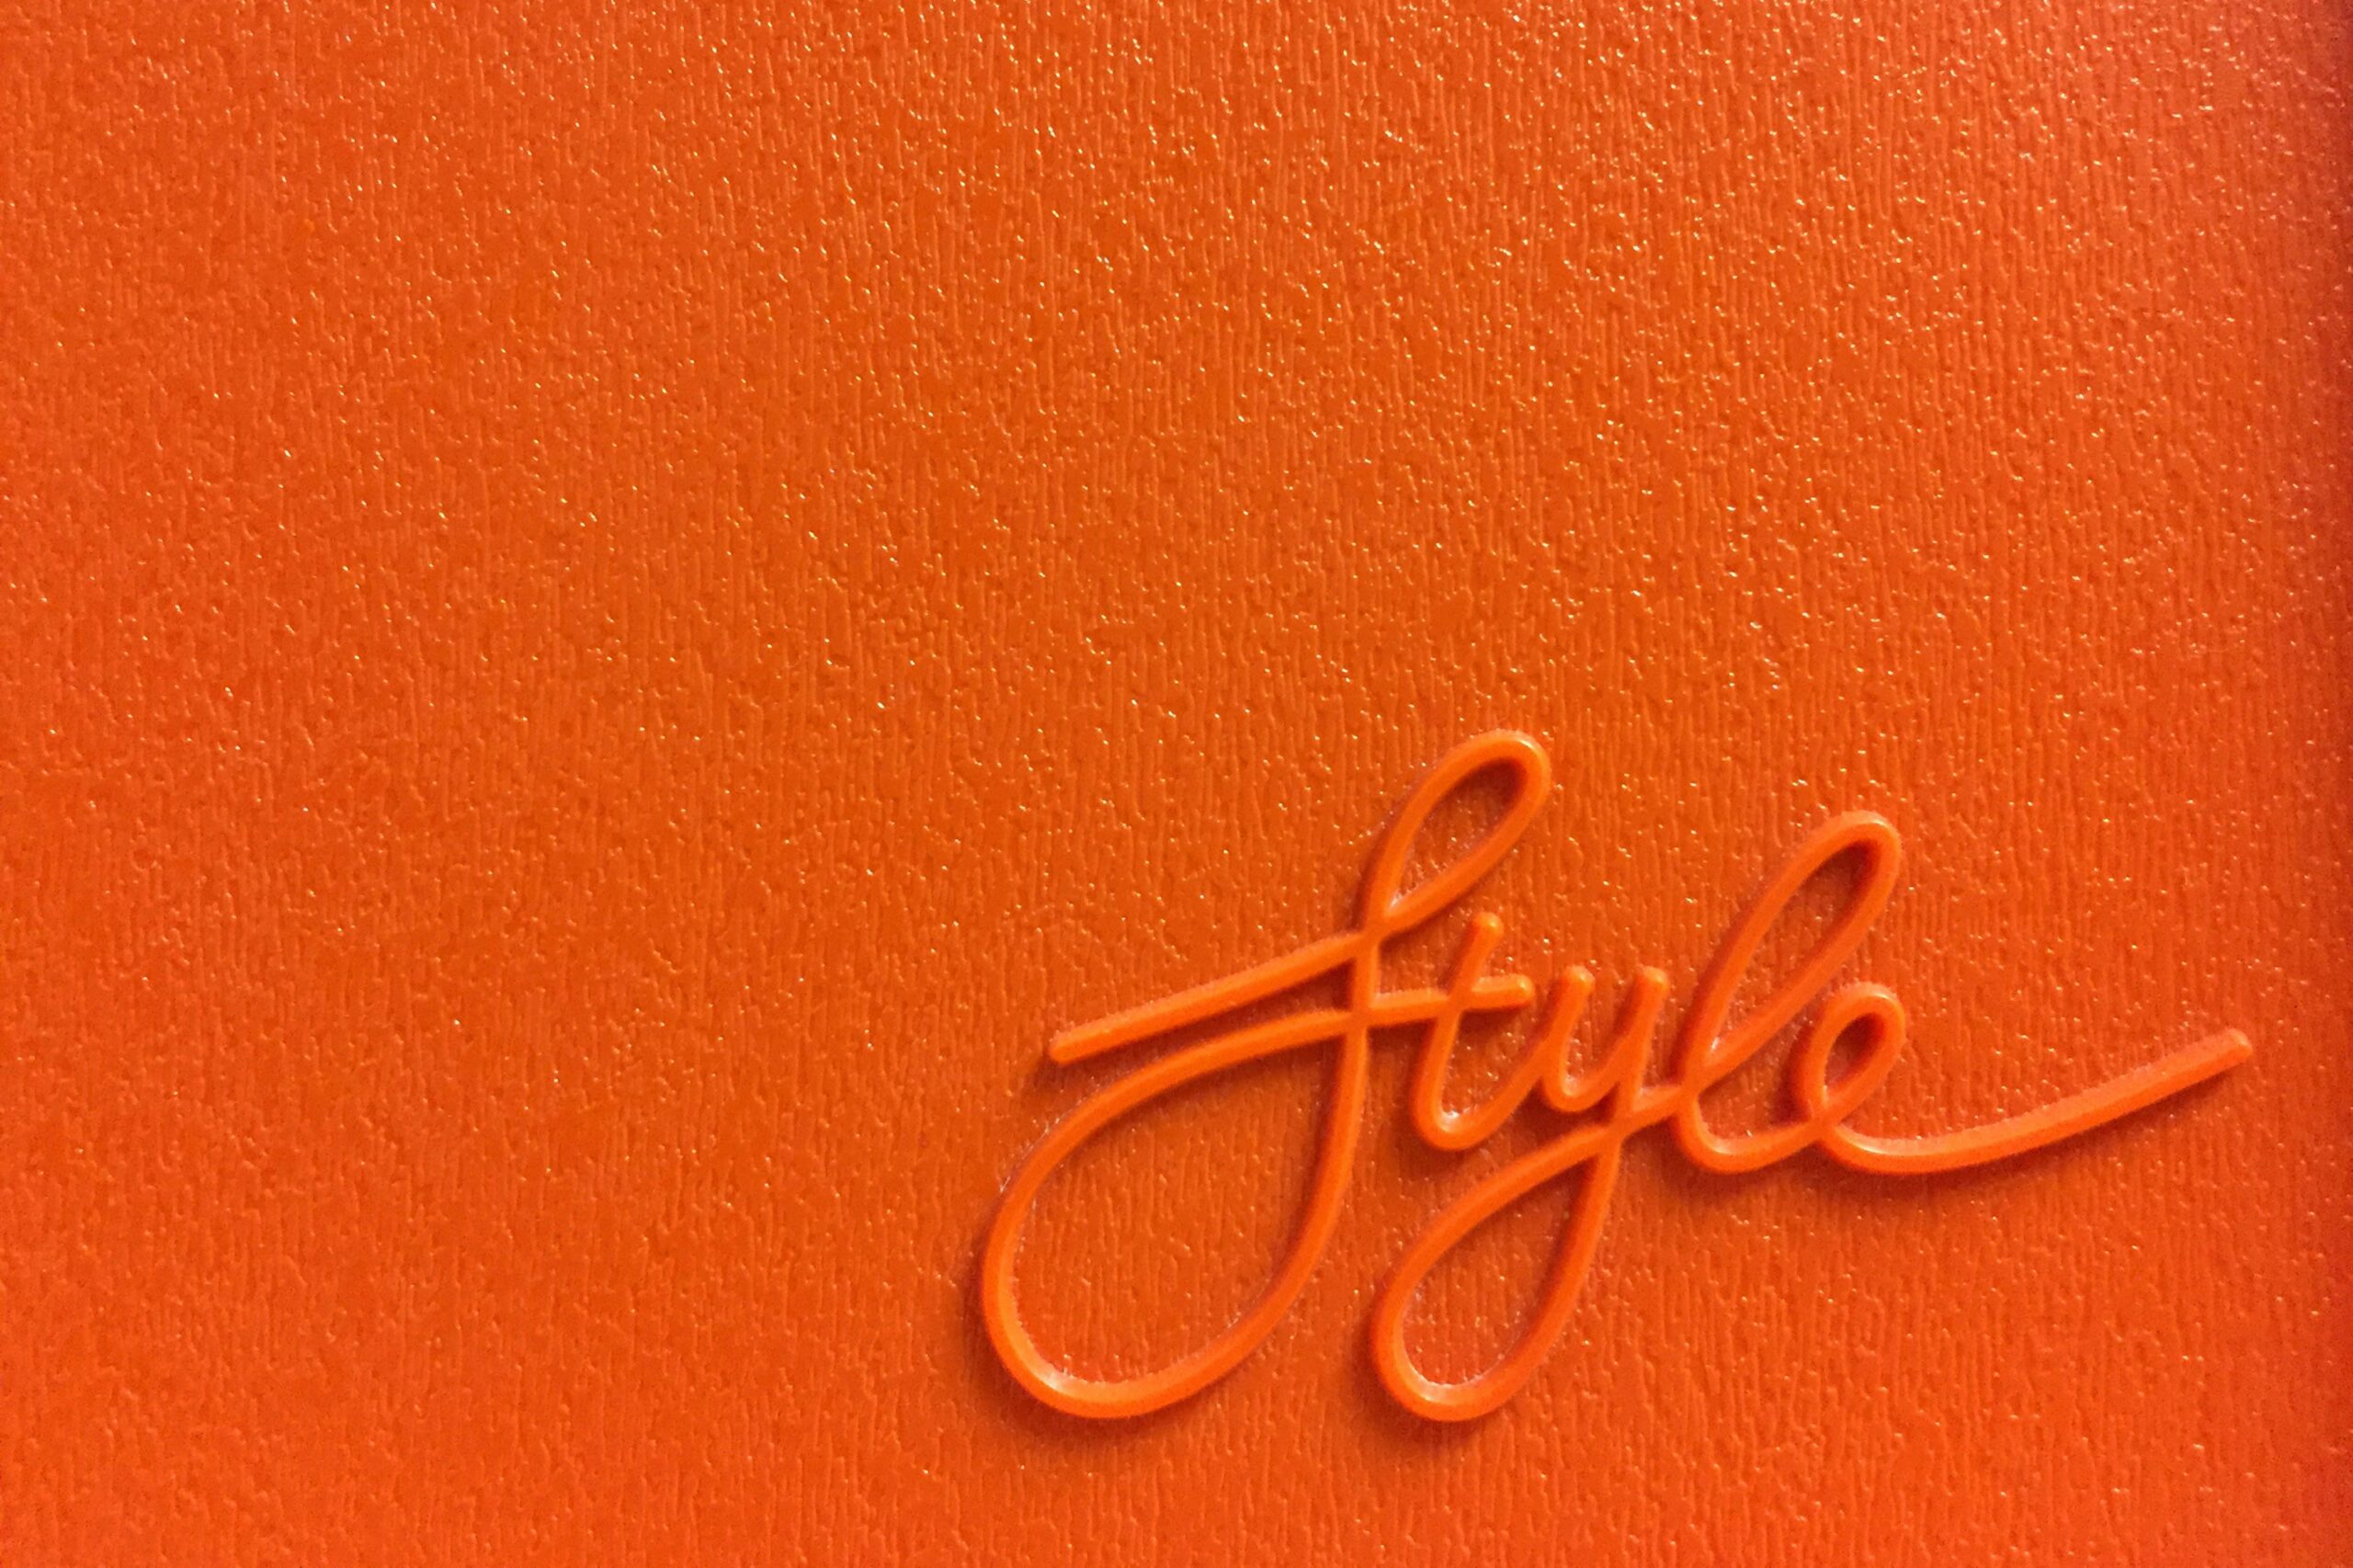 An orange surface with "style" written on it in a script font.